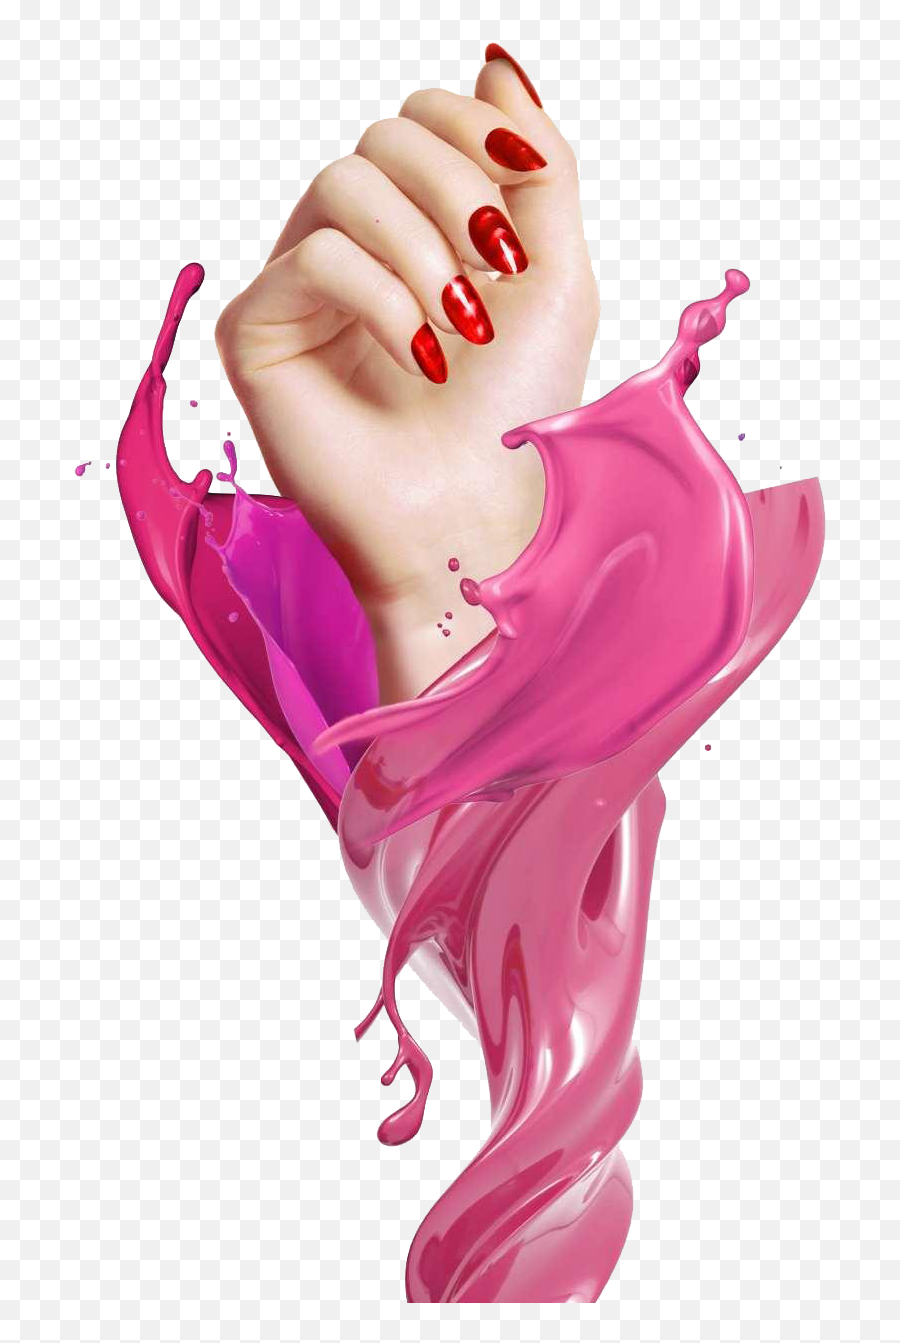 Download Art Colorful Poster Nails Artificial Nail Gel - Poster Nails Emoji,Manicure Emoticon